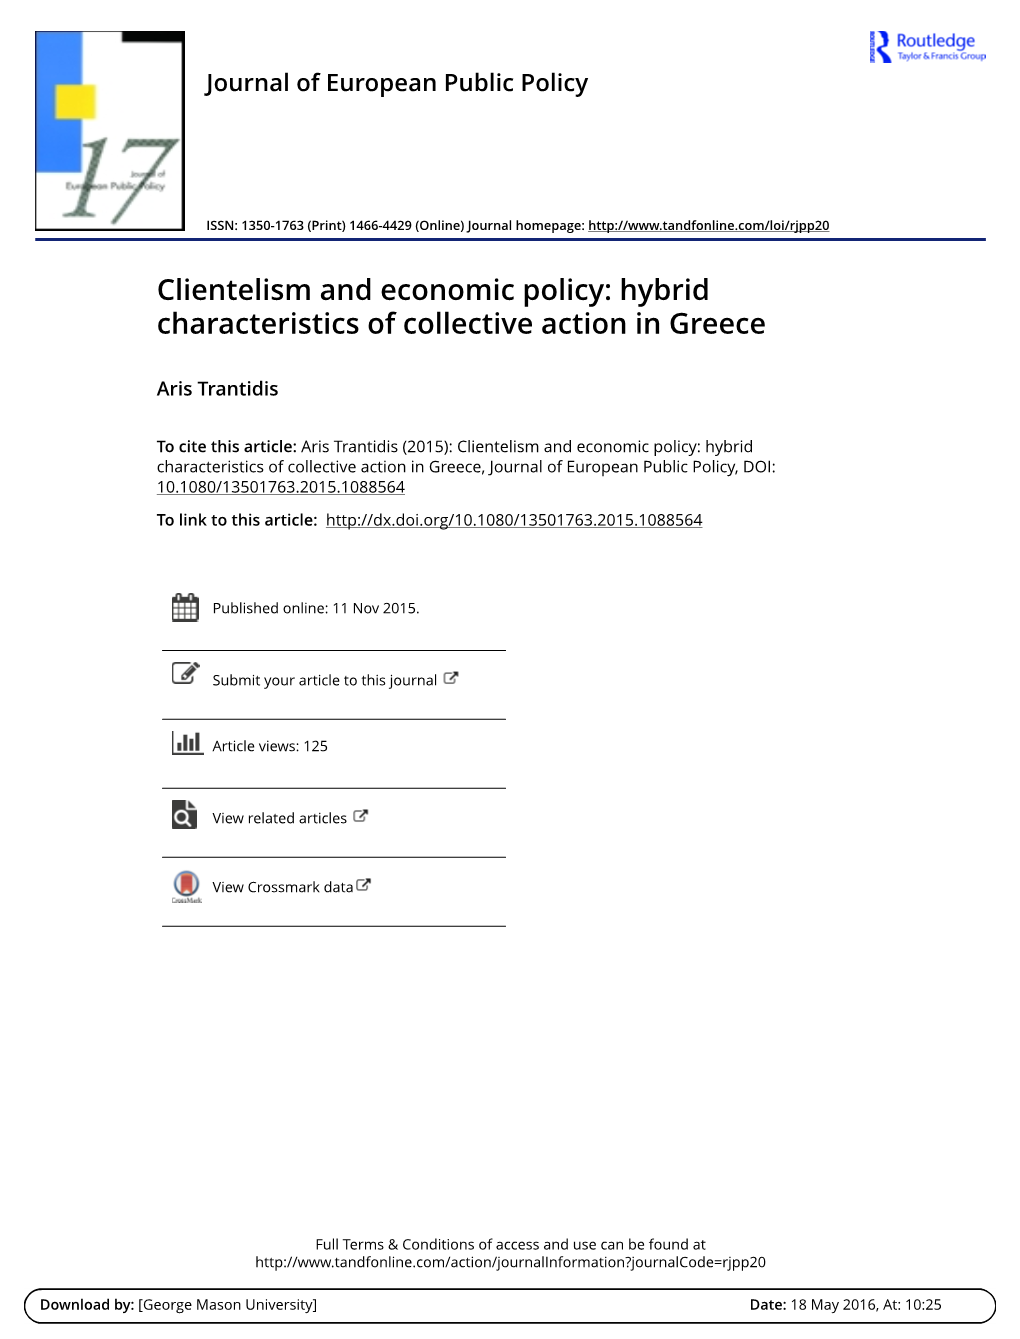 Clientelism and Economic Policy: Hybrid Characteristics of Collective Action in Greece